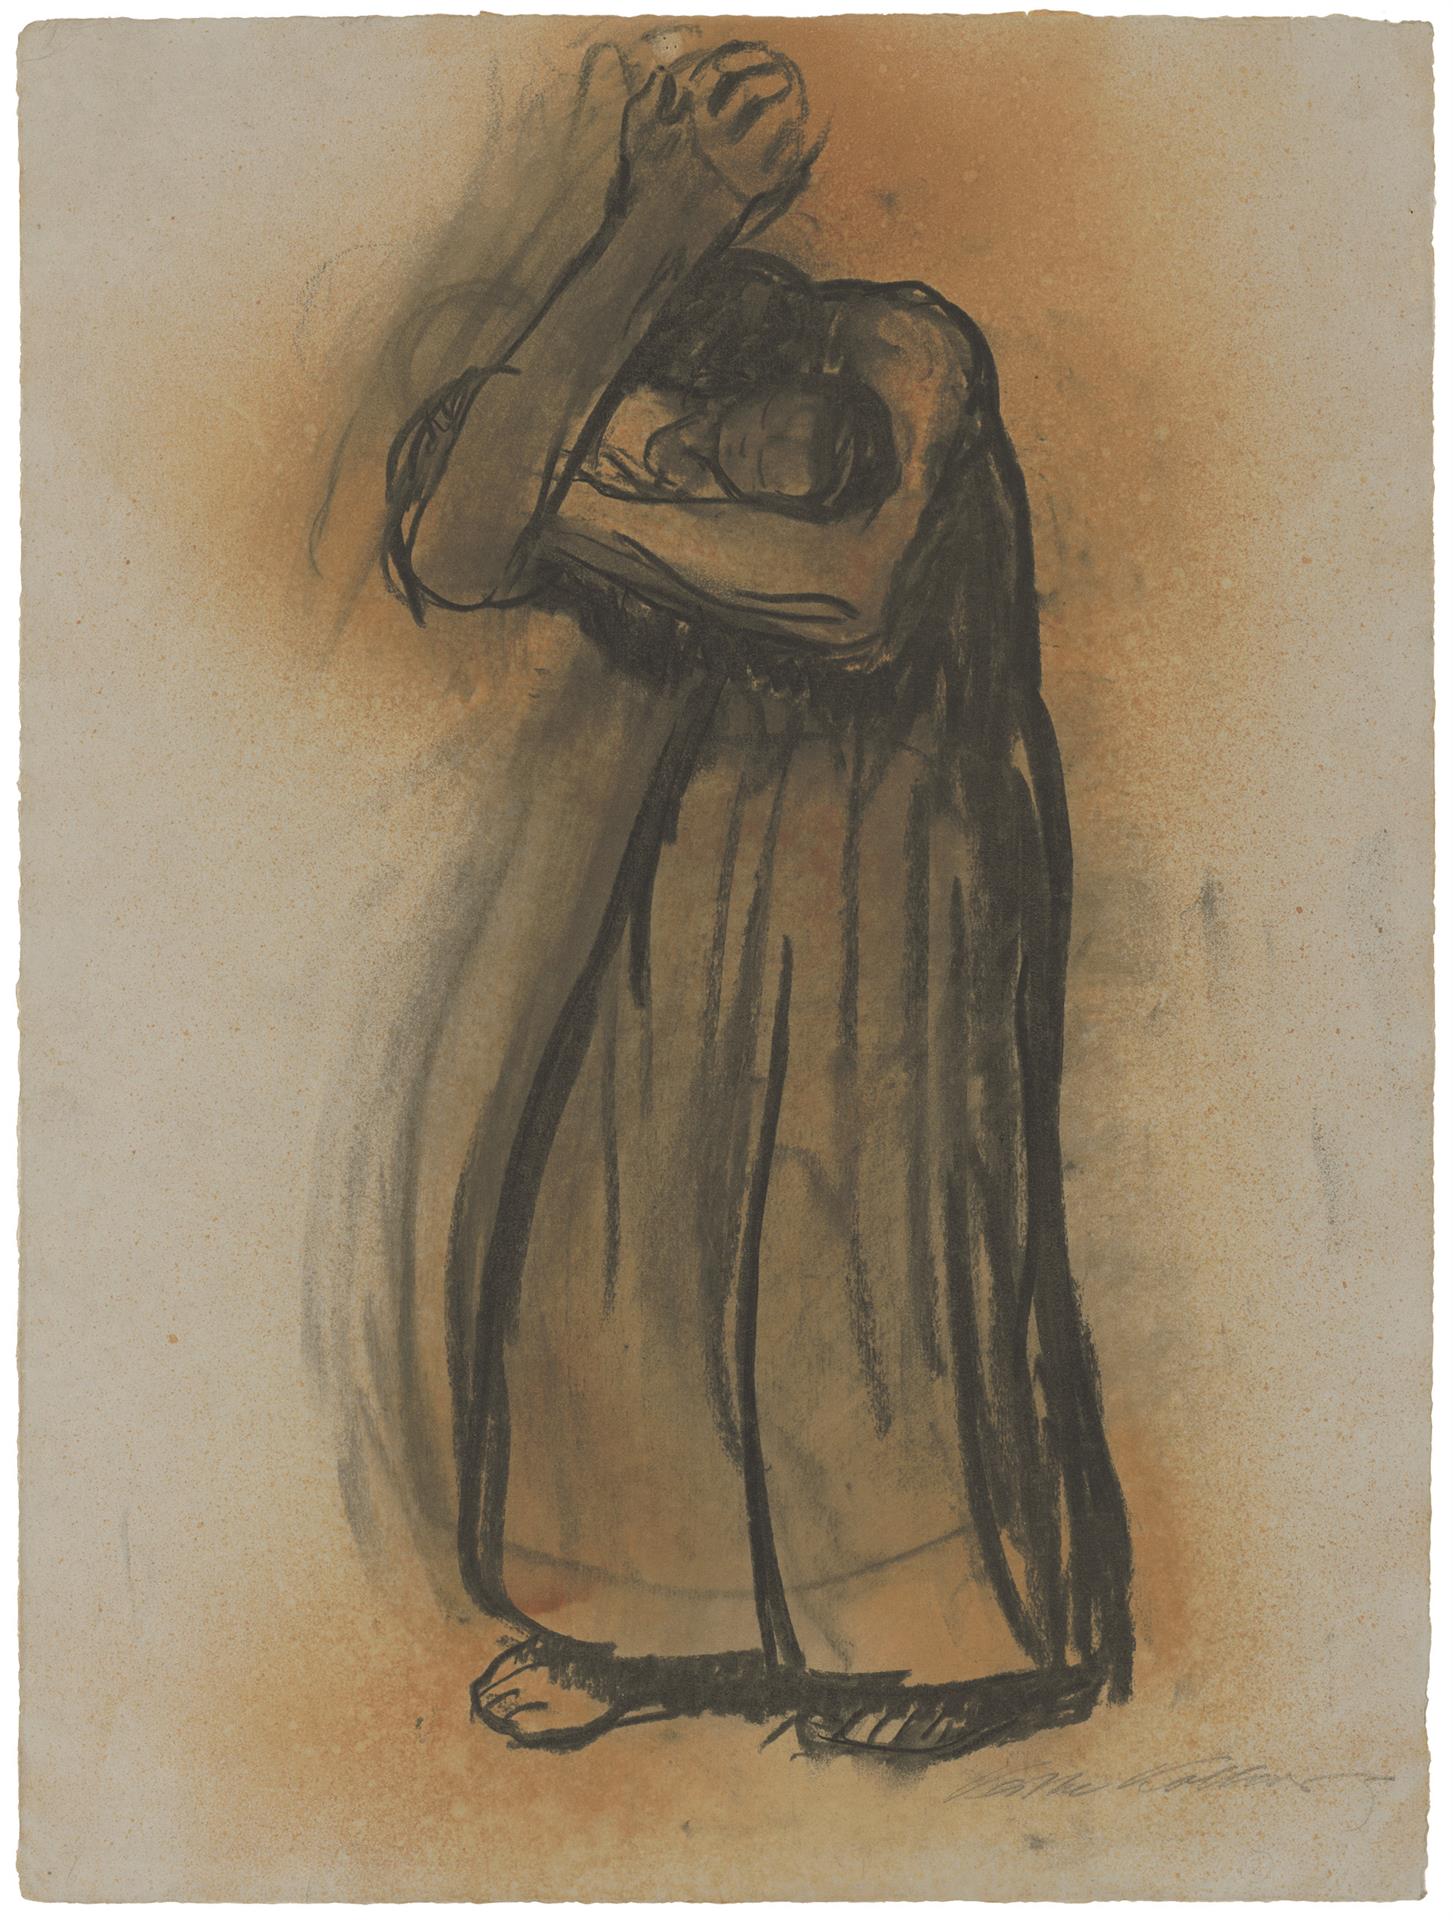 Käthe Kollwitz, Woman, standing, pressing her Infant to her Face, 1915, charcoal on grey colouring paper, fixed with shellac, NT 722, Cologne Kollwitz Collection © Käthe Kollwitz Museum Köln